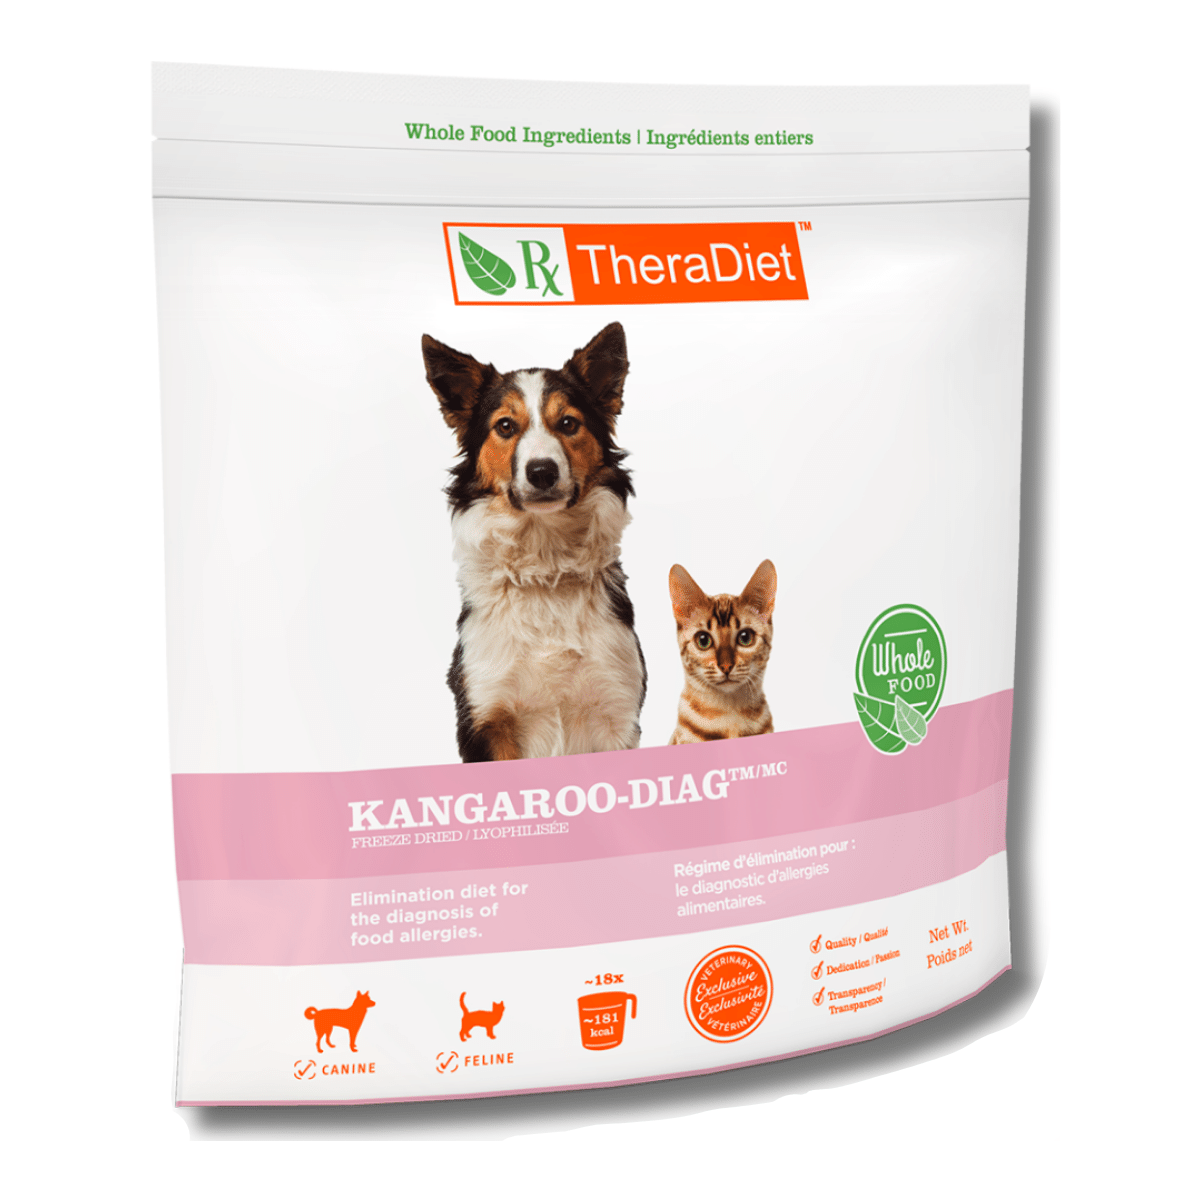 Kangaroo-DIAG Freeze-Dried Food For Dogs And Cats